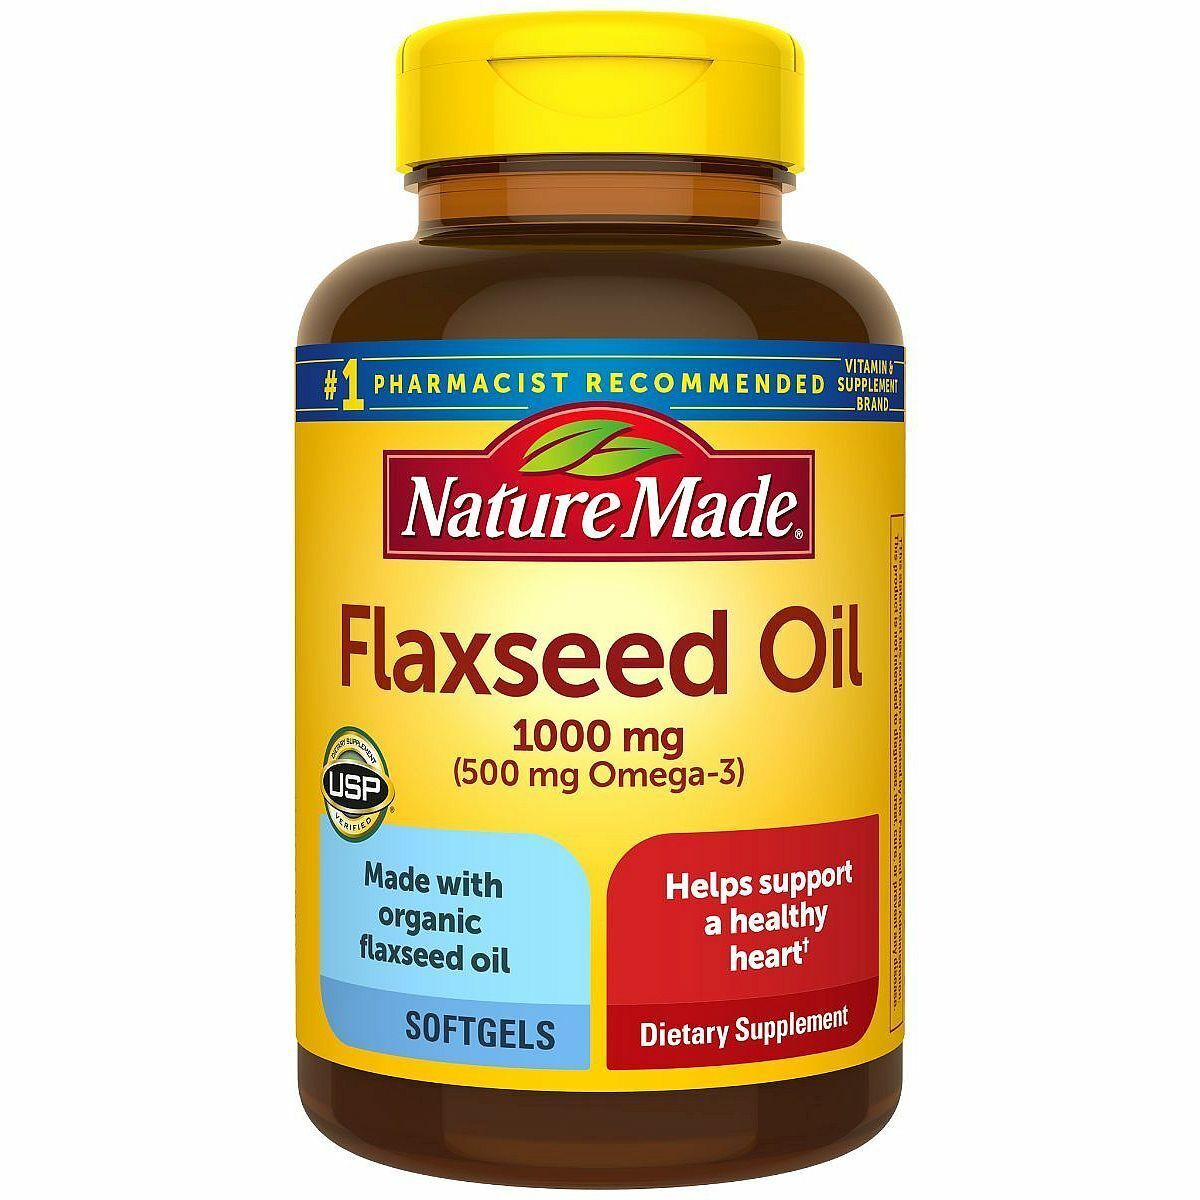 Nature Made Flaxseed Oil 1000mg (500 mg Omega-3) 100 Softgels Exp. 8/24 Lot of 3 - $27.72